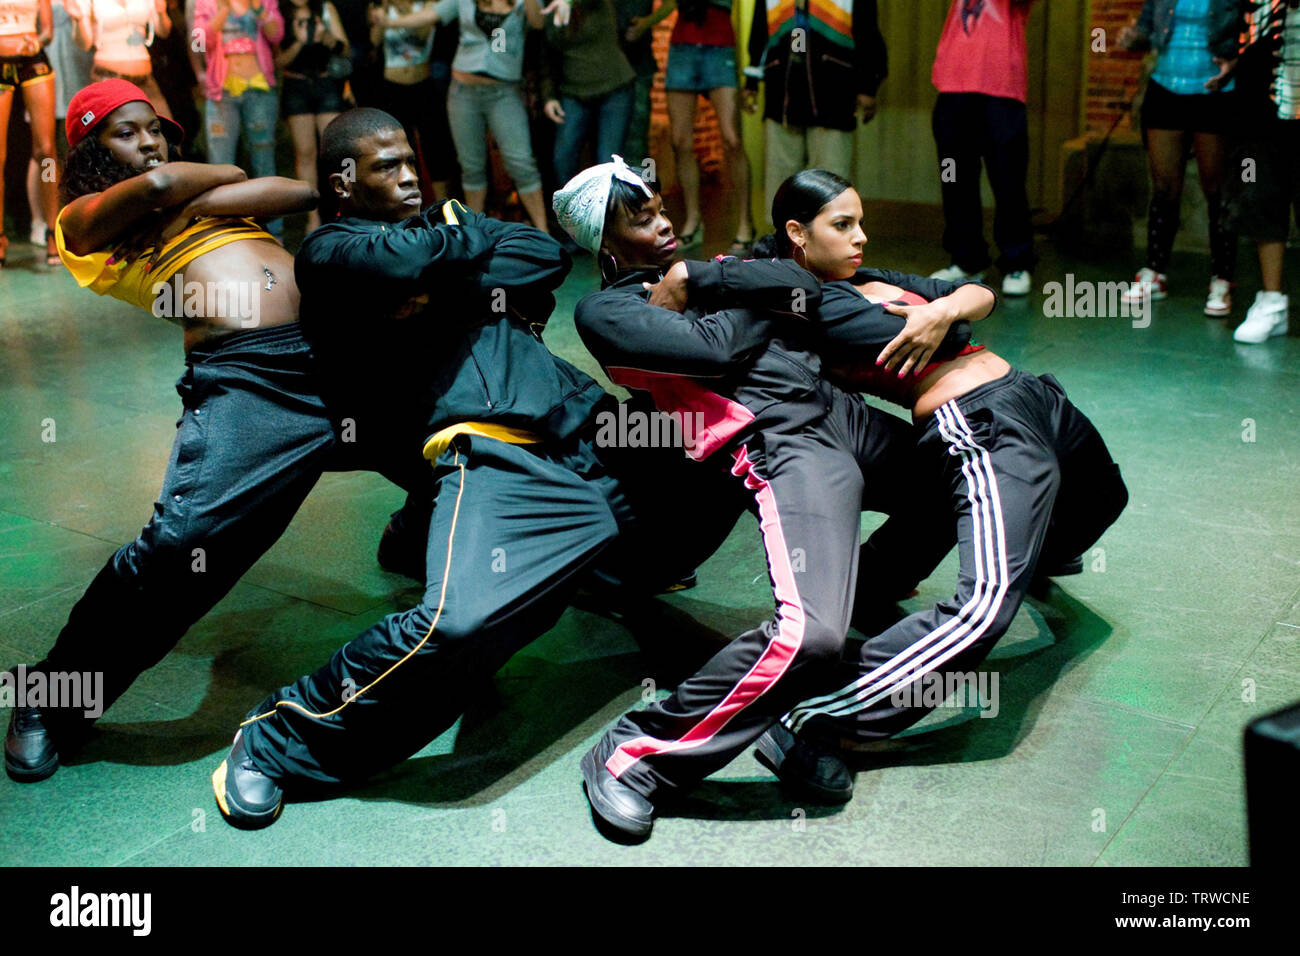 BLACK THOMAS , DANIELLE POLANCO , TELISHA SHAW and EBONE JOHNSON in STEP UP 2: THE STREETS (2008). Copyright: Editorial use only. No merchandising or book covers. This is a publicly distributed handout. Access rights only, no license of copyright provided. Only to be reproduced in conjunction with promotion of this film. Credit: OFFSPRING ENTERTAINMENT/SUMMIT ENTERTAINMENT/TOUCHSTONE PICT / EMERSON, SAM / Album Stock Photo